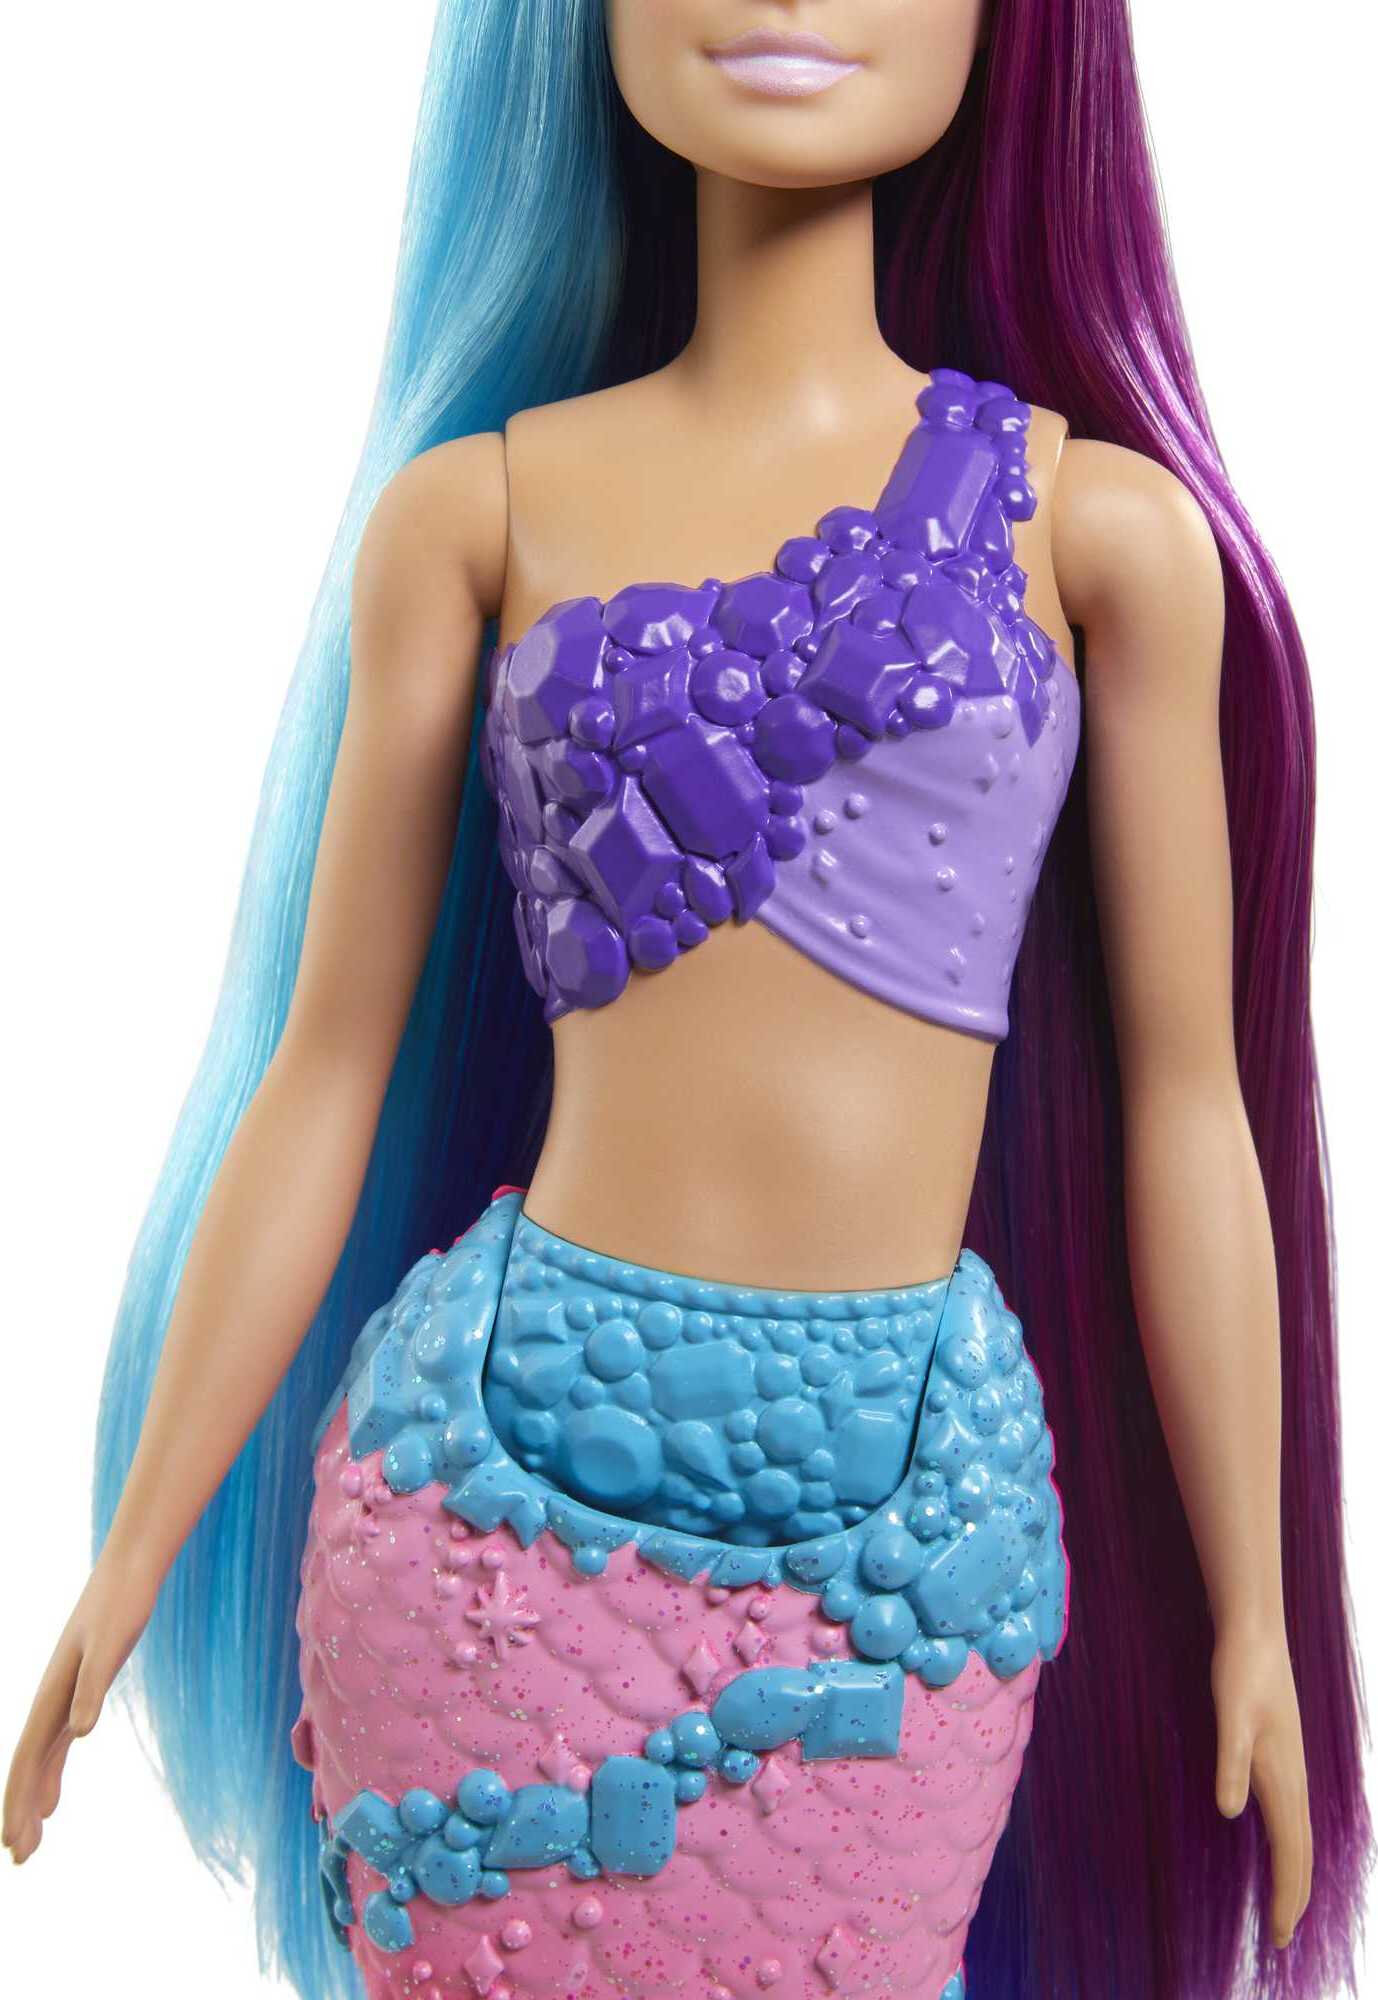 Barbie Dreamtopia Mermaid Doll with Extra-Long Fantasy Hair and Styling Accessories - image 4 of 6